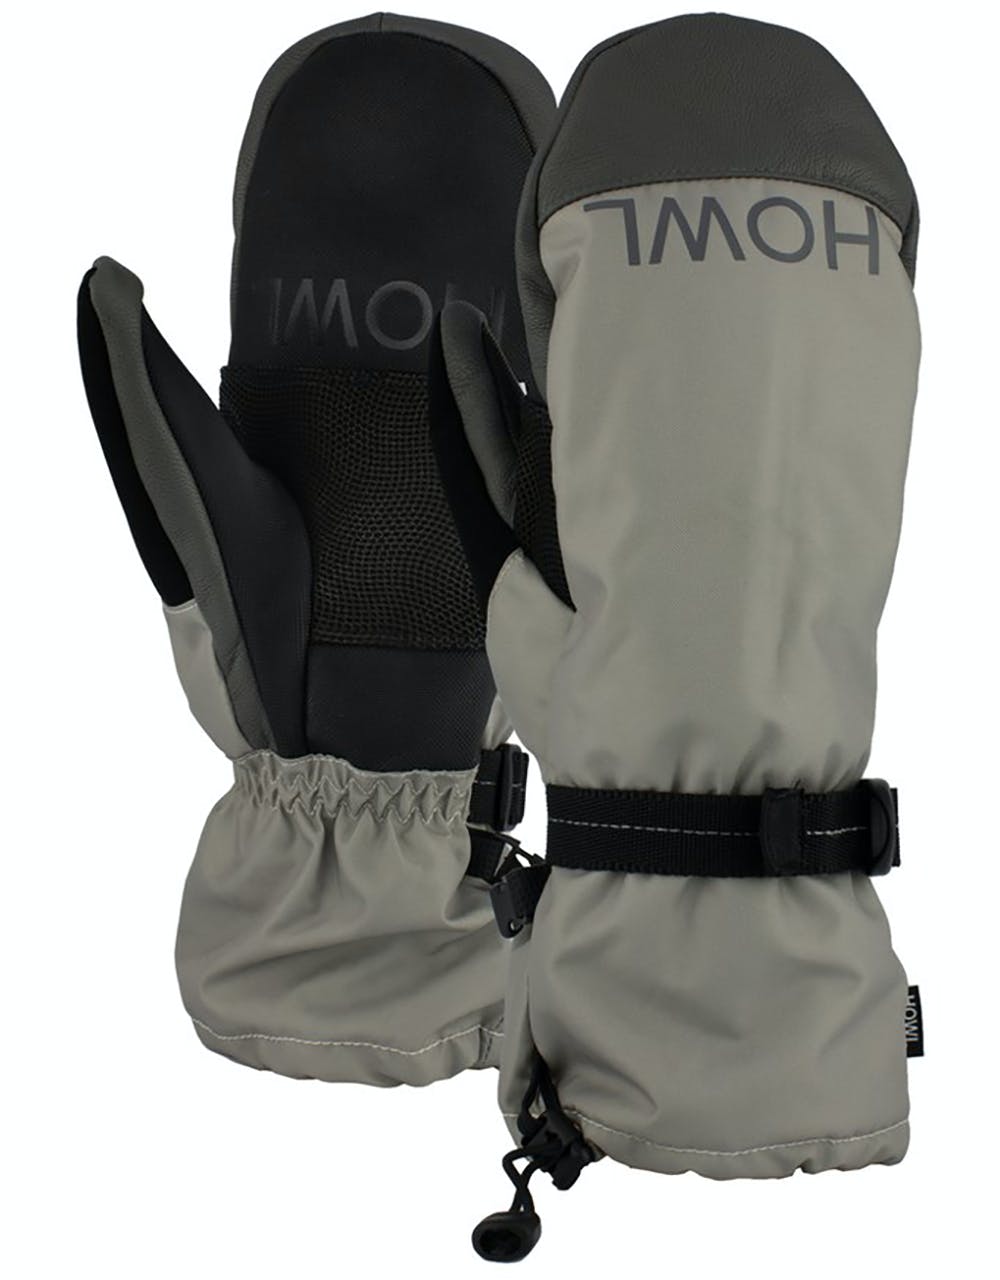 Howl Network 2020 Snowboard Mitts - Grey